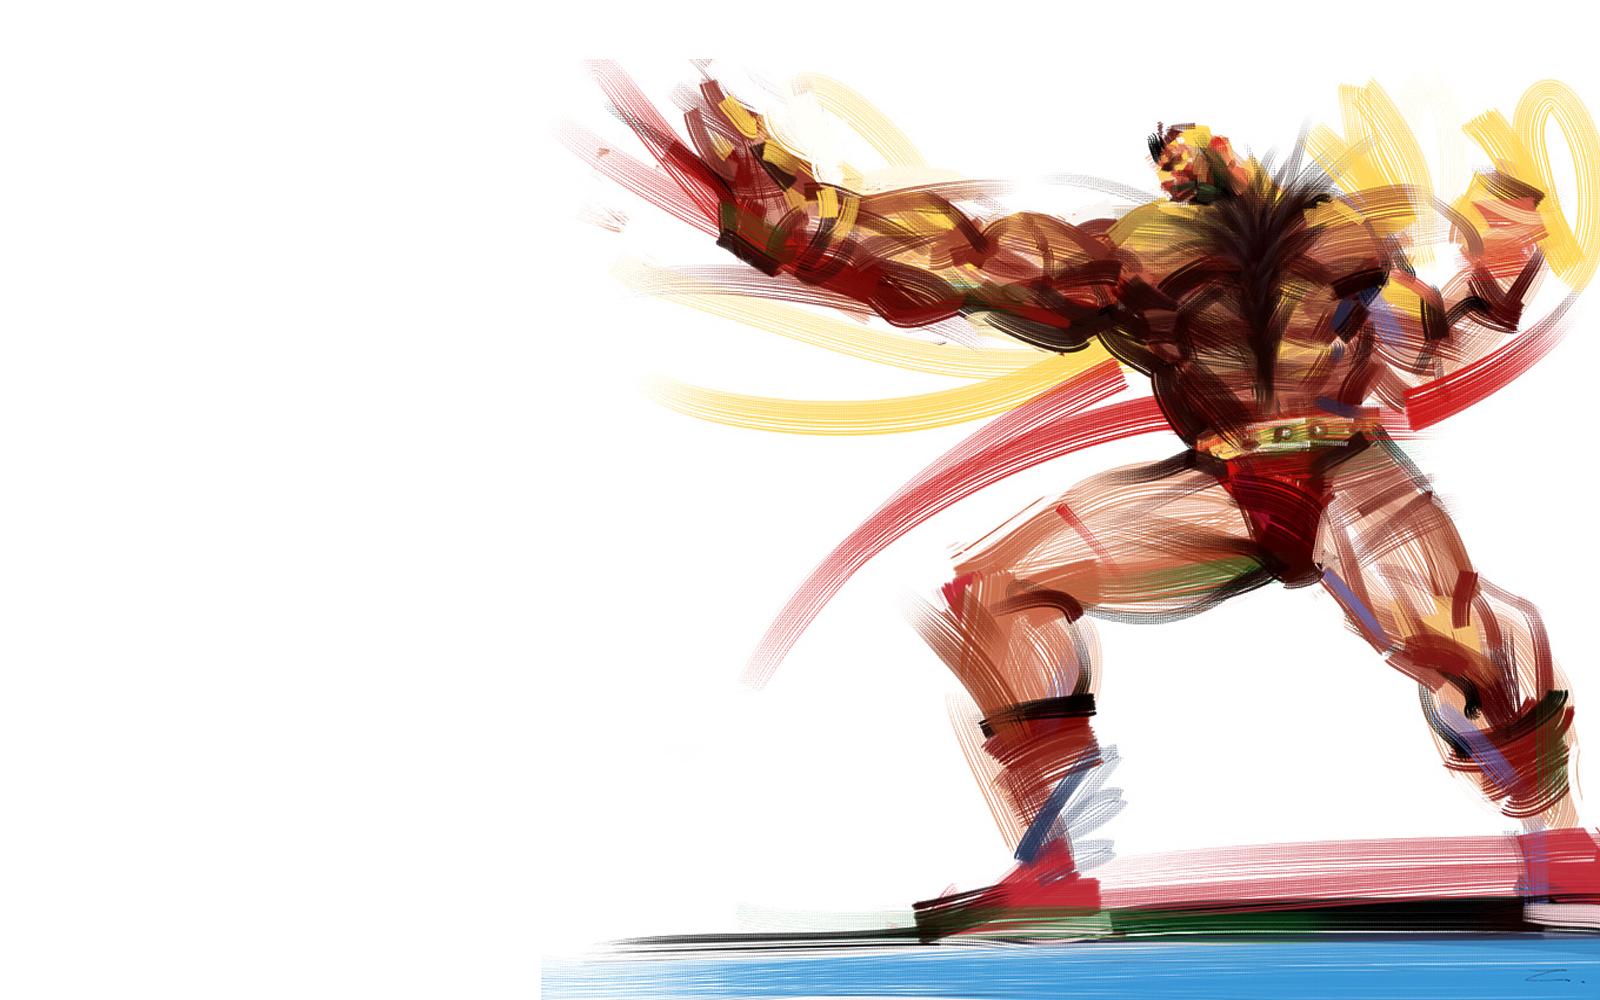 Zangief - - High Quality and Resolution Wallpapers